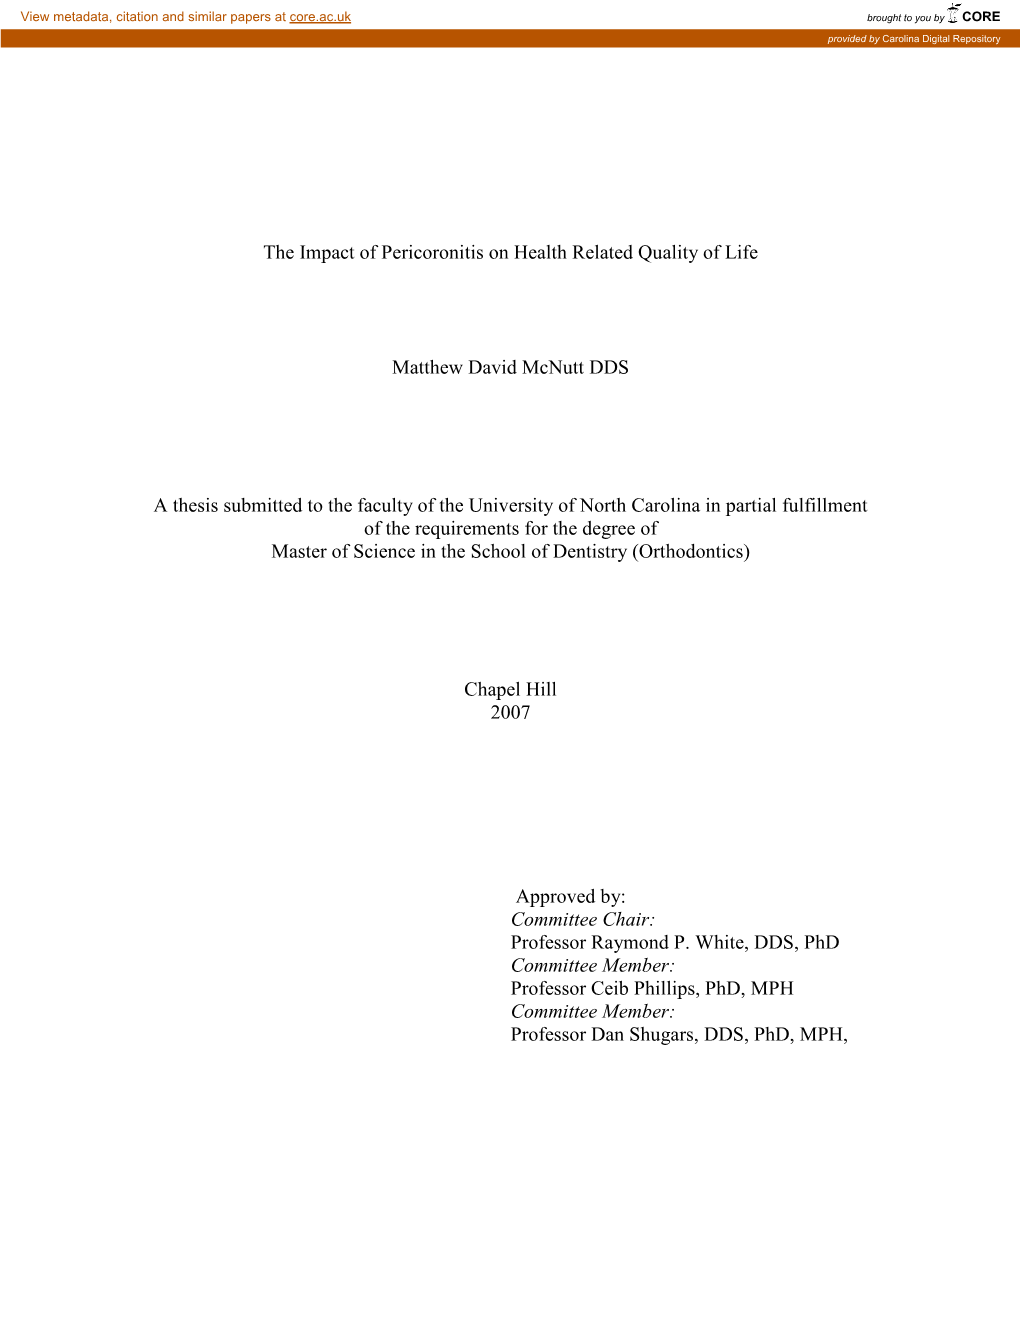 The Impact of Pericoronitis on Health Related Quality of Life Matthew David Mcnutt DDS a Thesis Submitted to the Faculty Of